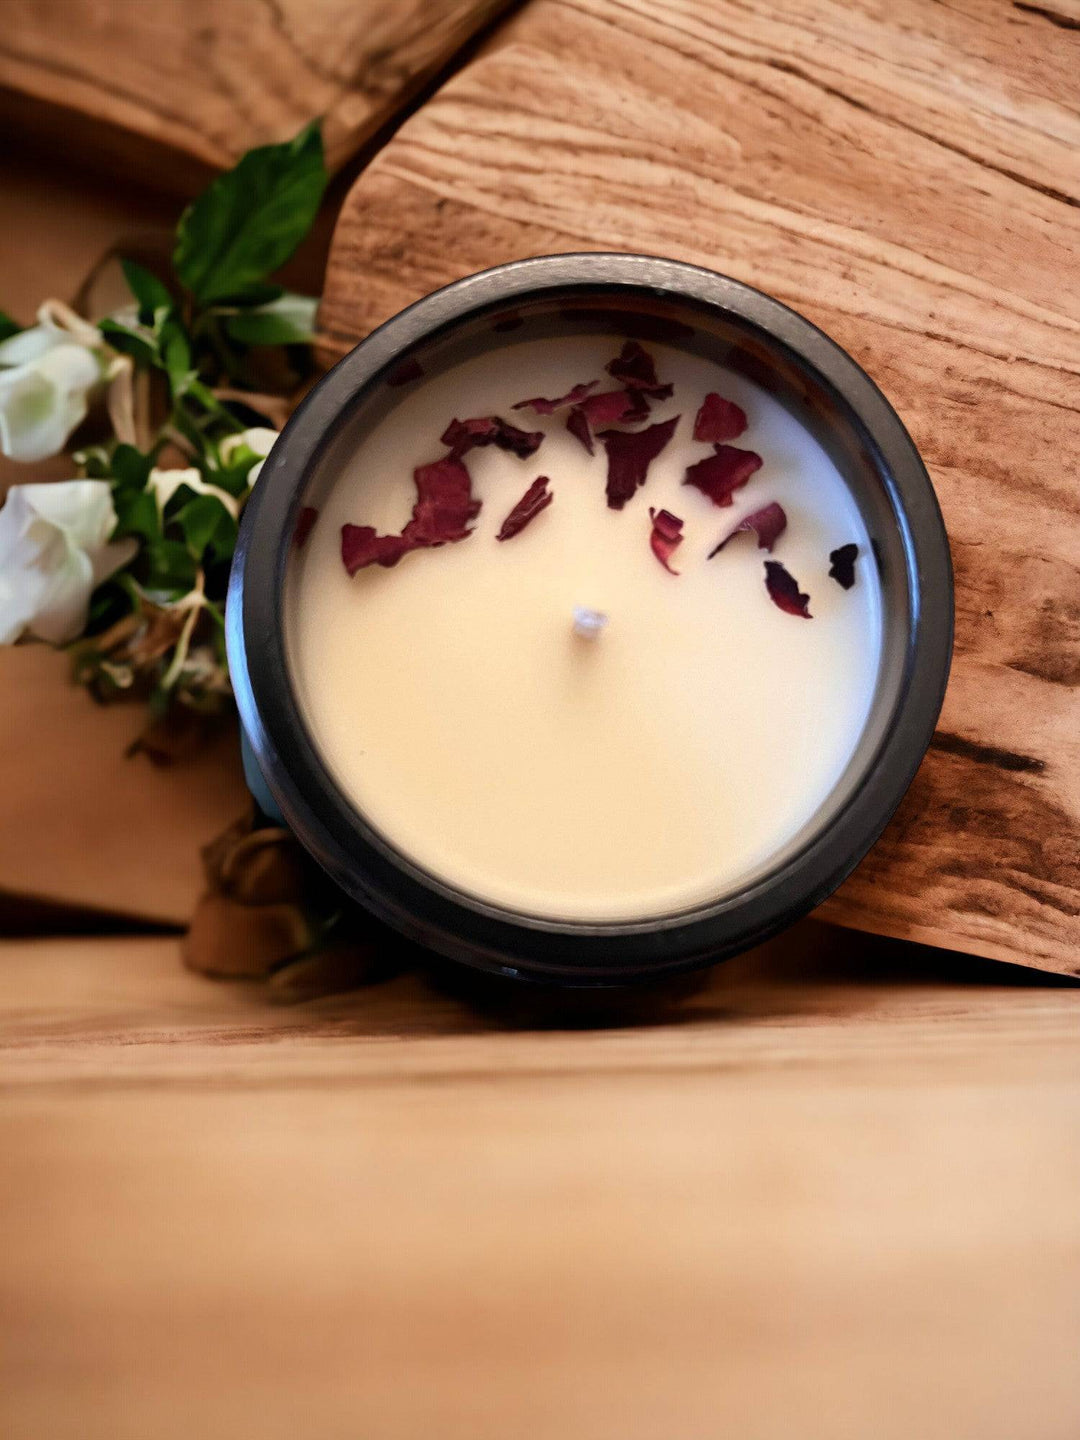 Soy Wax Aromatherapy Candle - TidySpaces